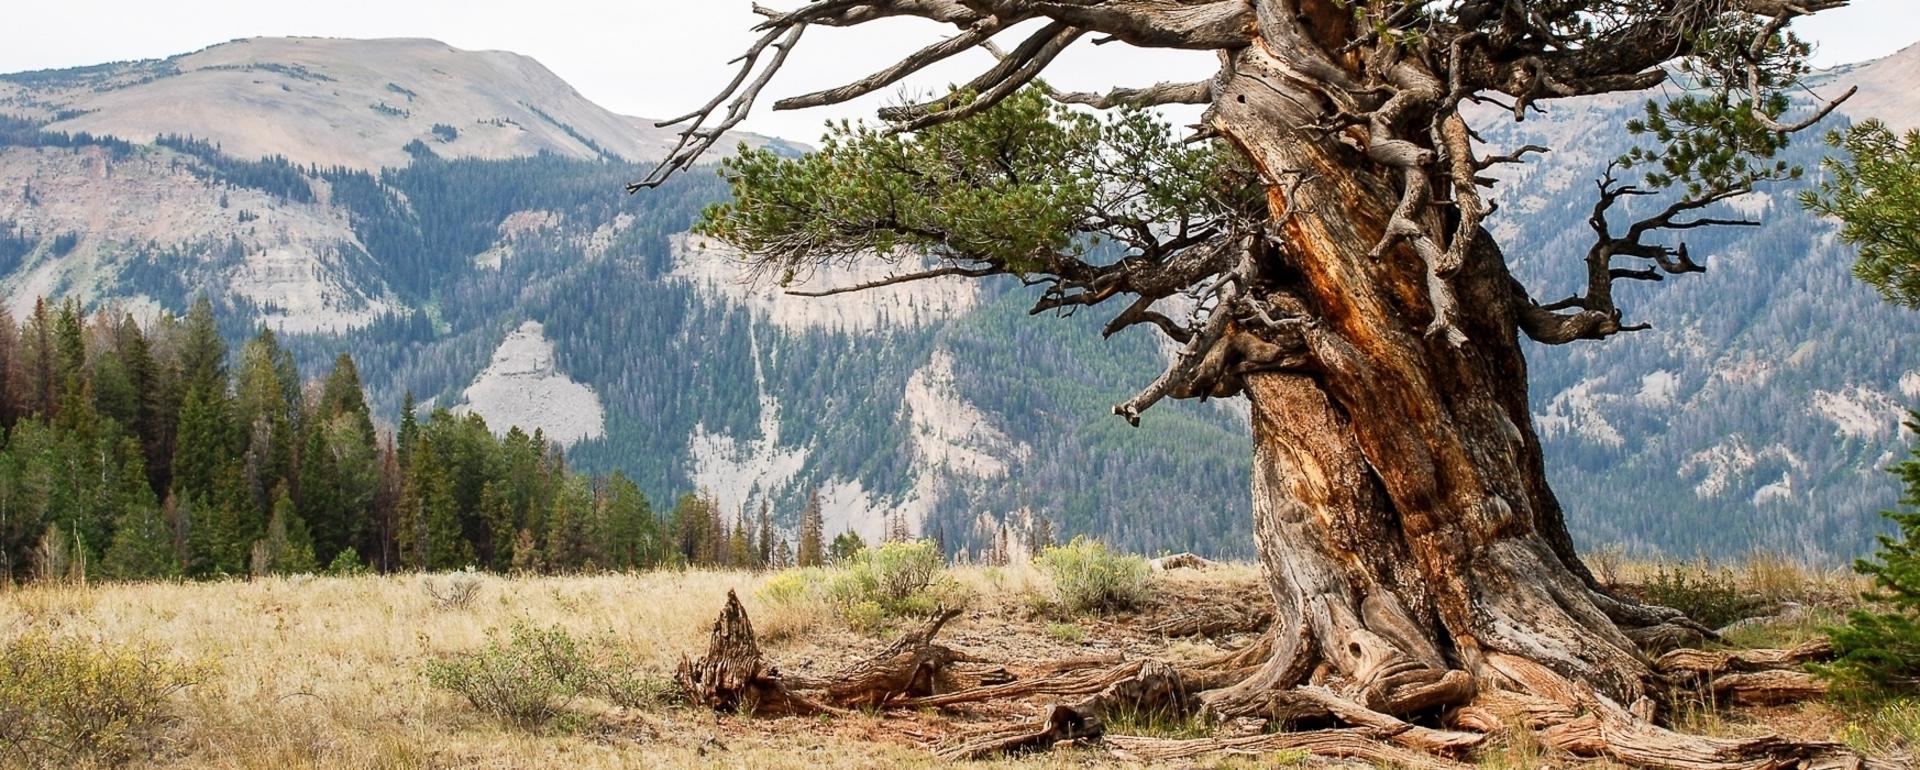 Old-growth forests, whether in large continuous stands or scattered pockets, have long found refuge in Greater Yellowstone